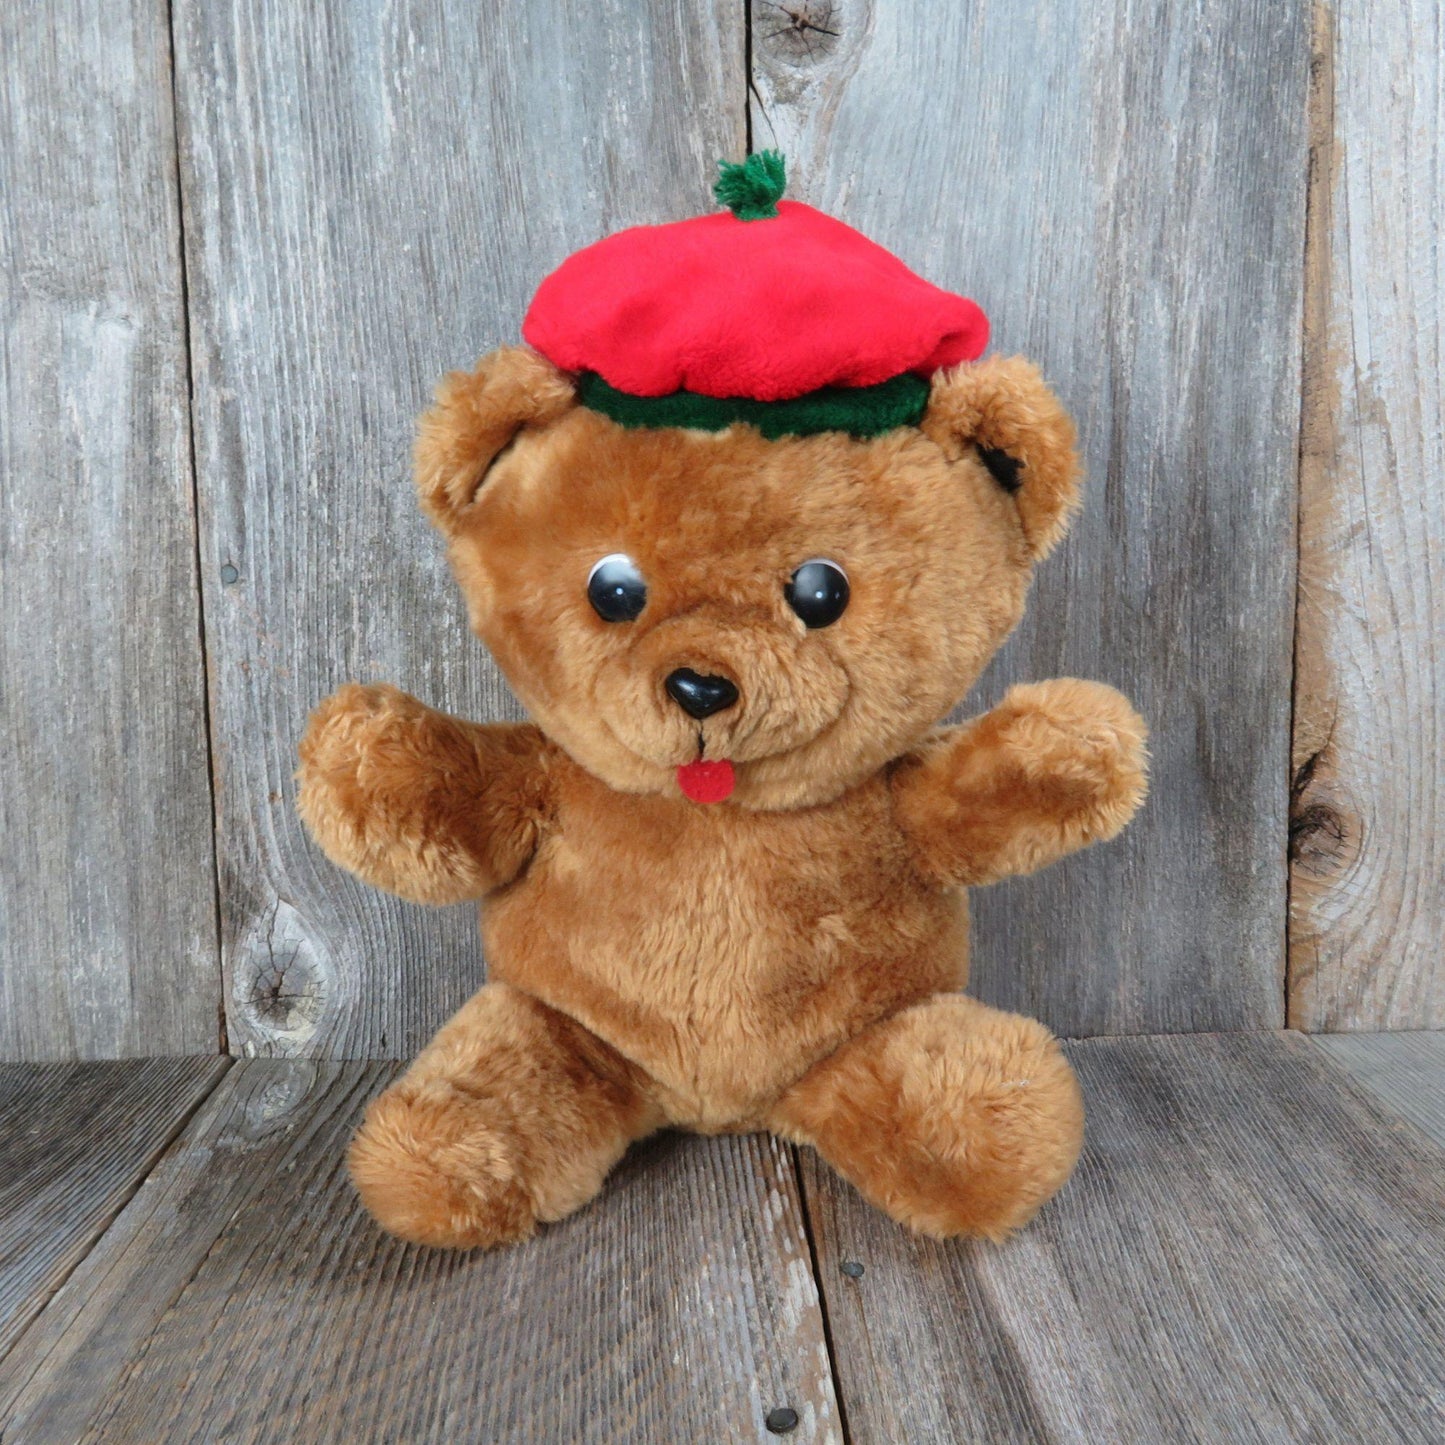 Vintage Teddy Bear with Red Green Beret Plush Large Plastic Eyes Christmas Noble Arts Stuffed Animal